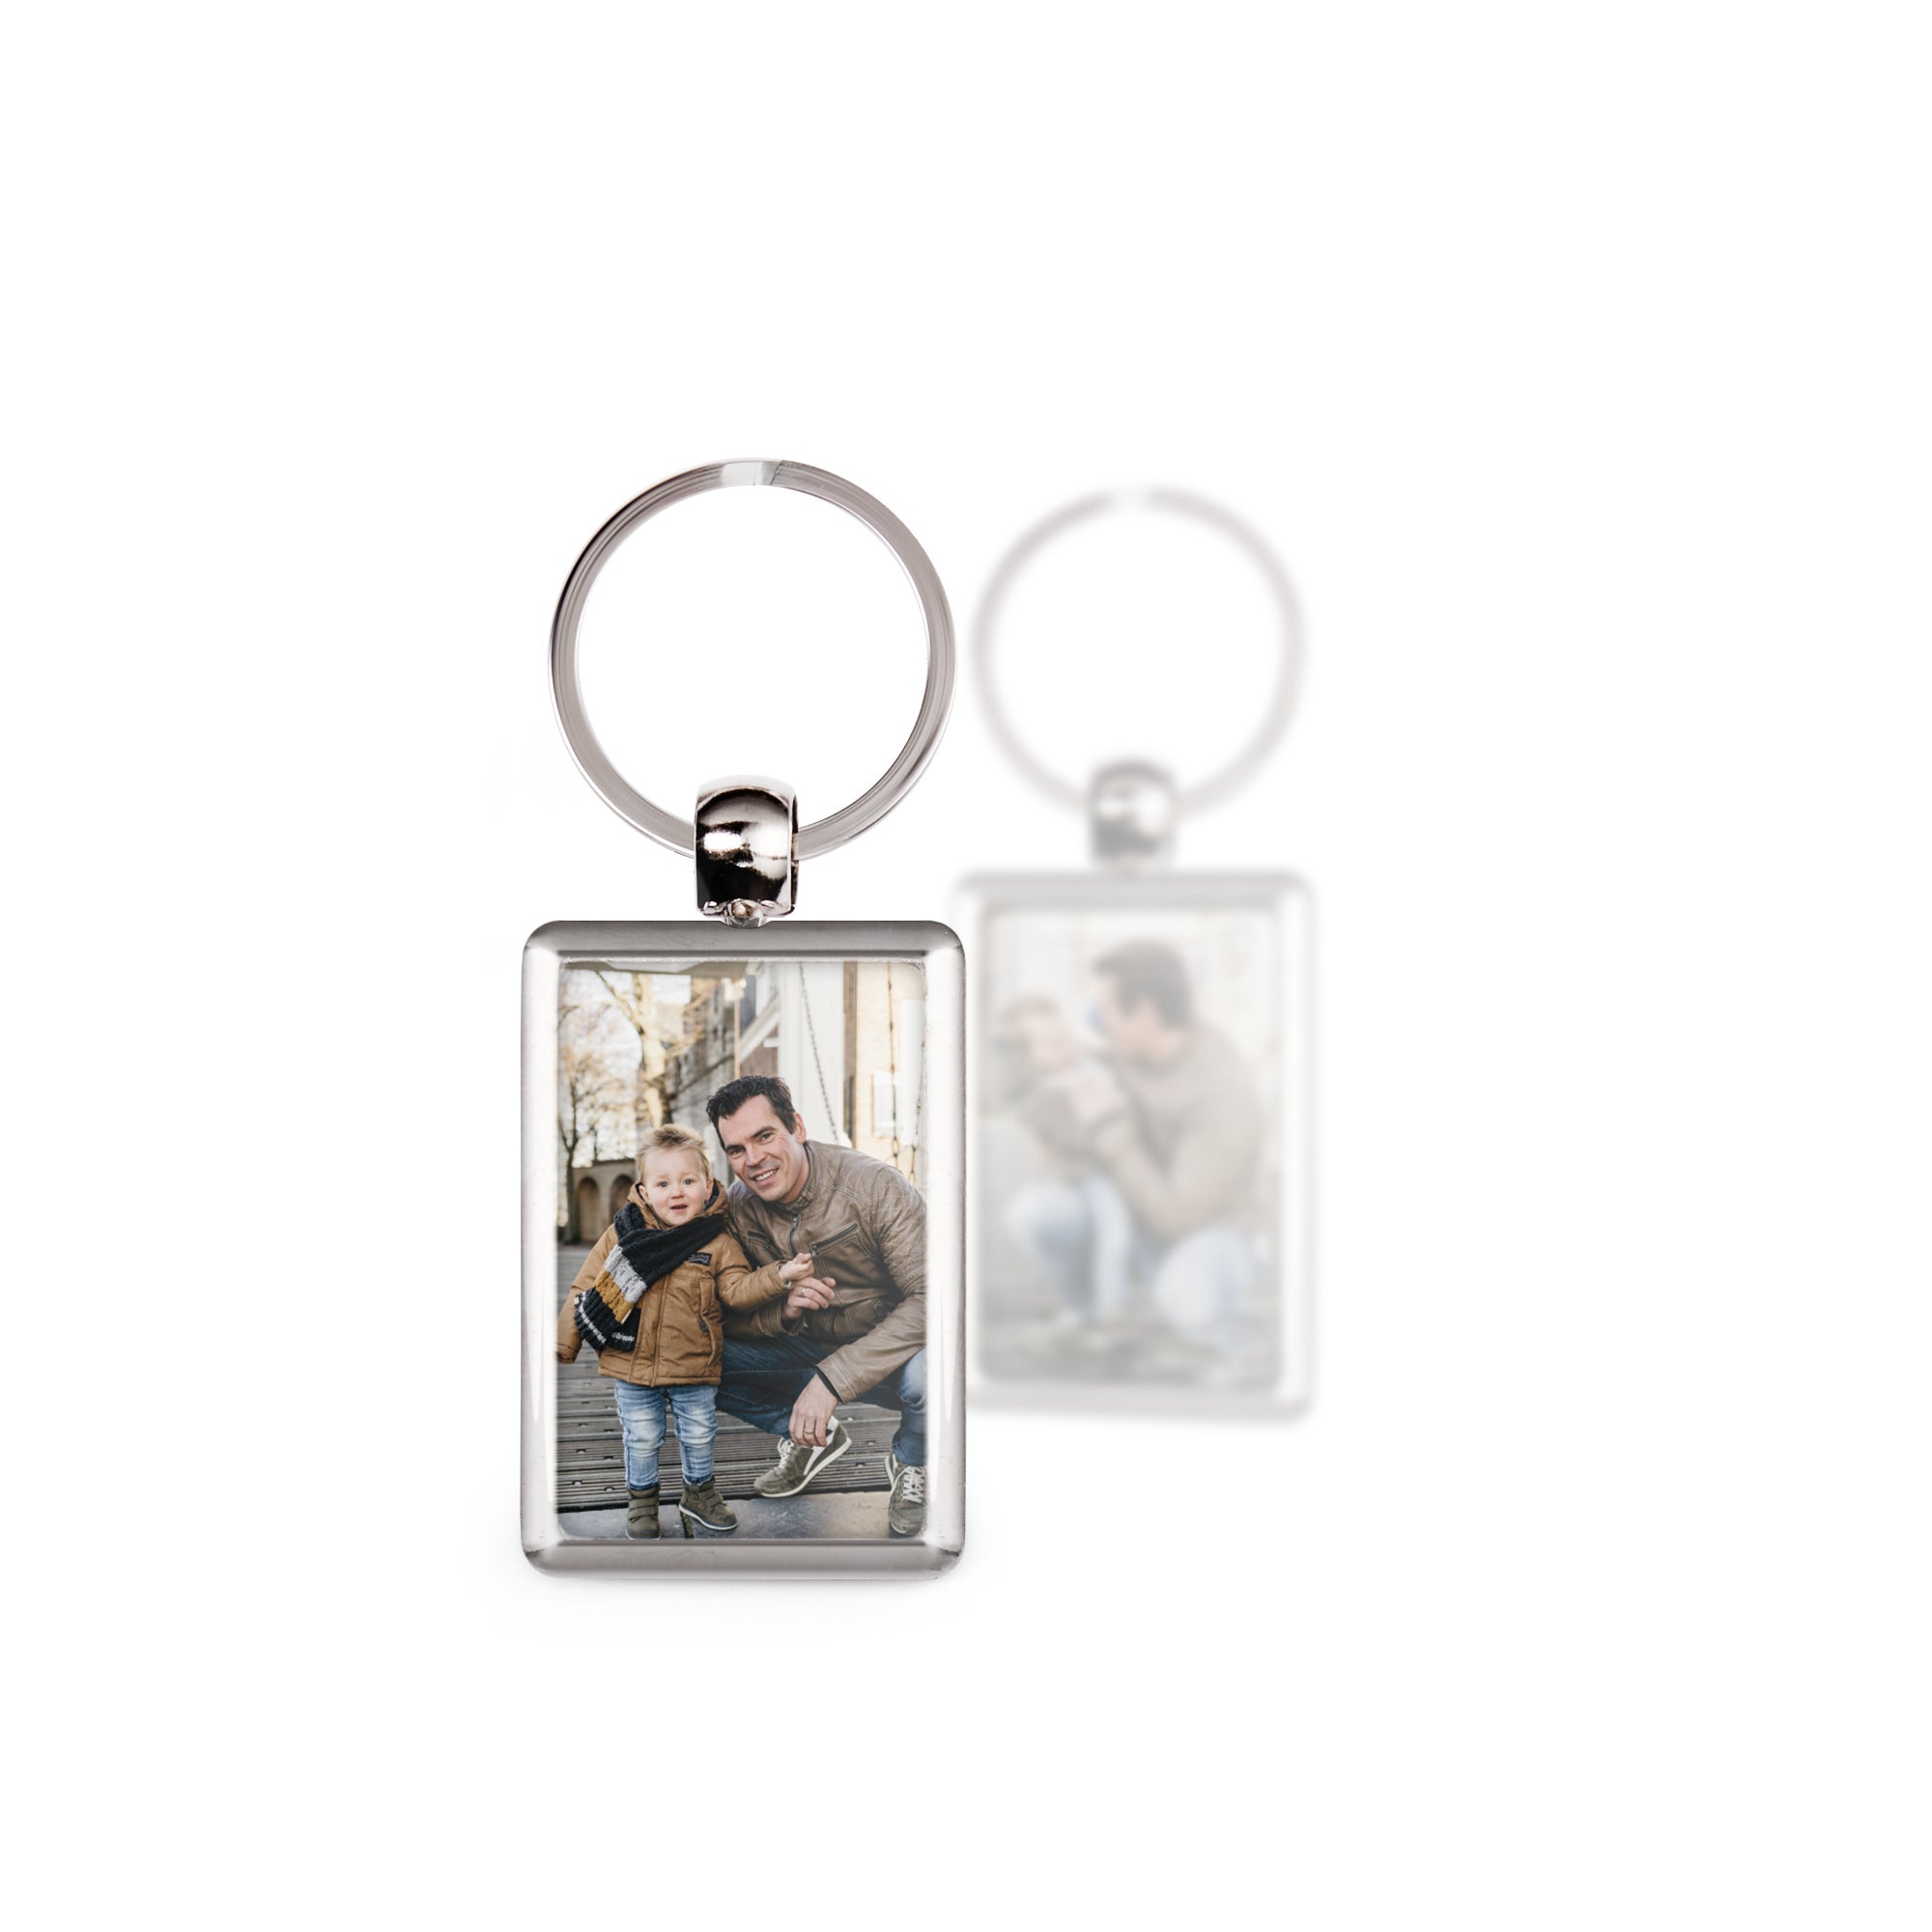 Personalised key ring - Father's Day - Stainless steel - Double-sided